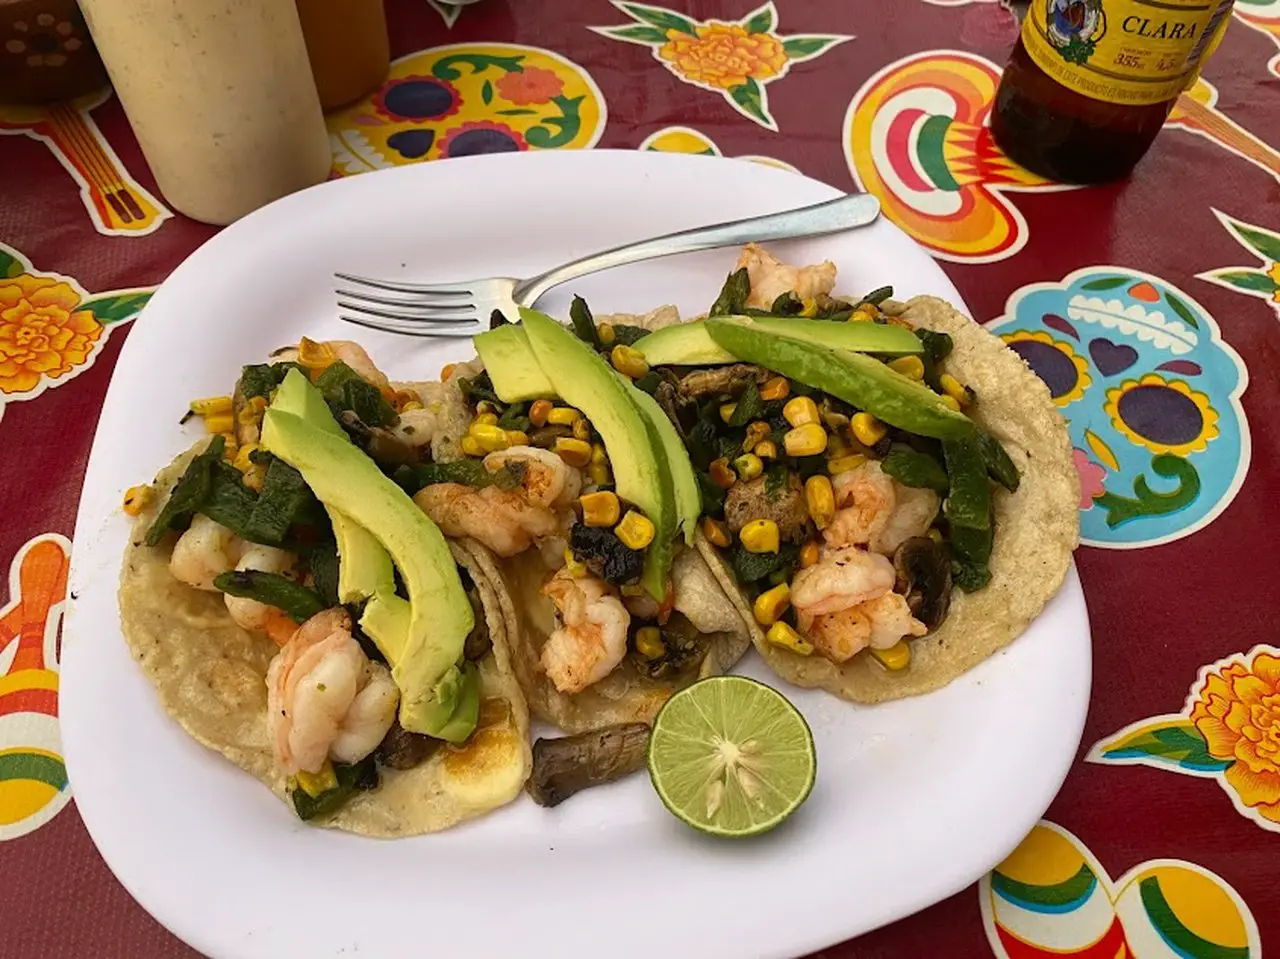 Shrimp tacos served at Mary's Tacos in Sayulita Mexico. Tacos are popular Mexican tapas you can sample in Liverpool.